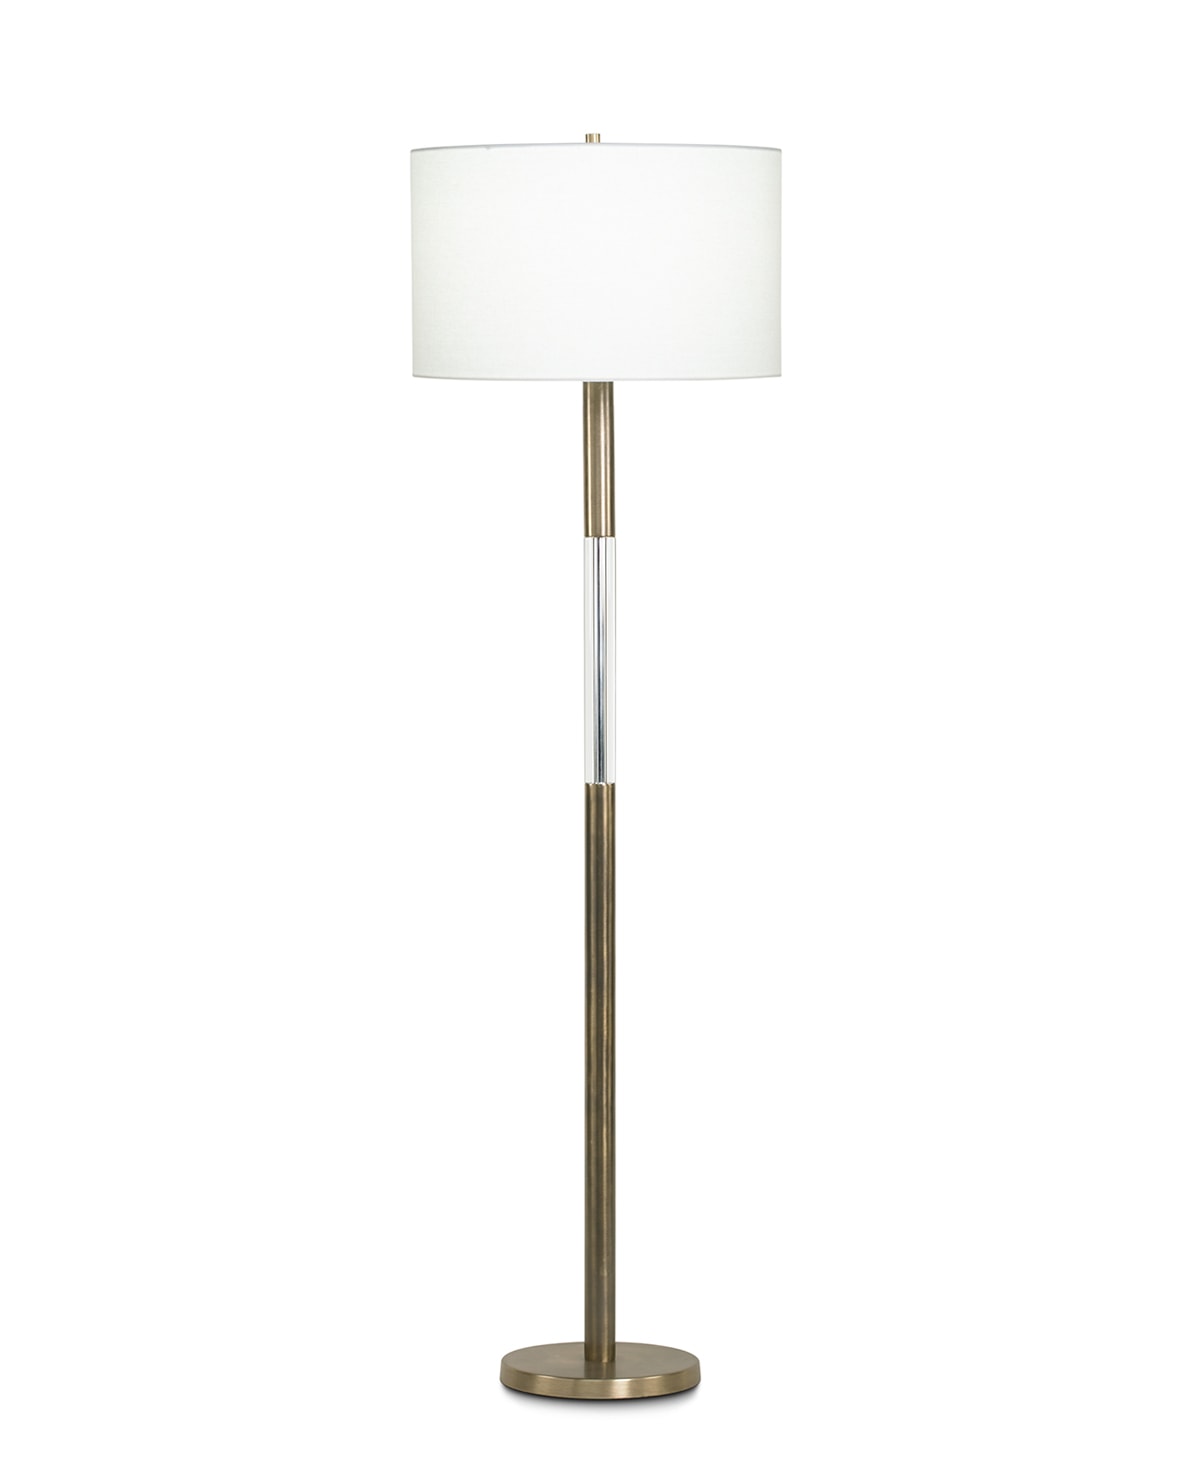 FlowDecor Severn Floor Lamp in metal with antique brass finish and crystal and off-white linen drum shade (# 3640)